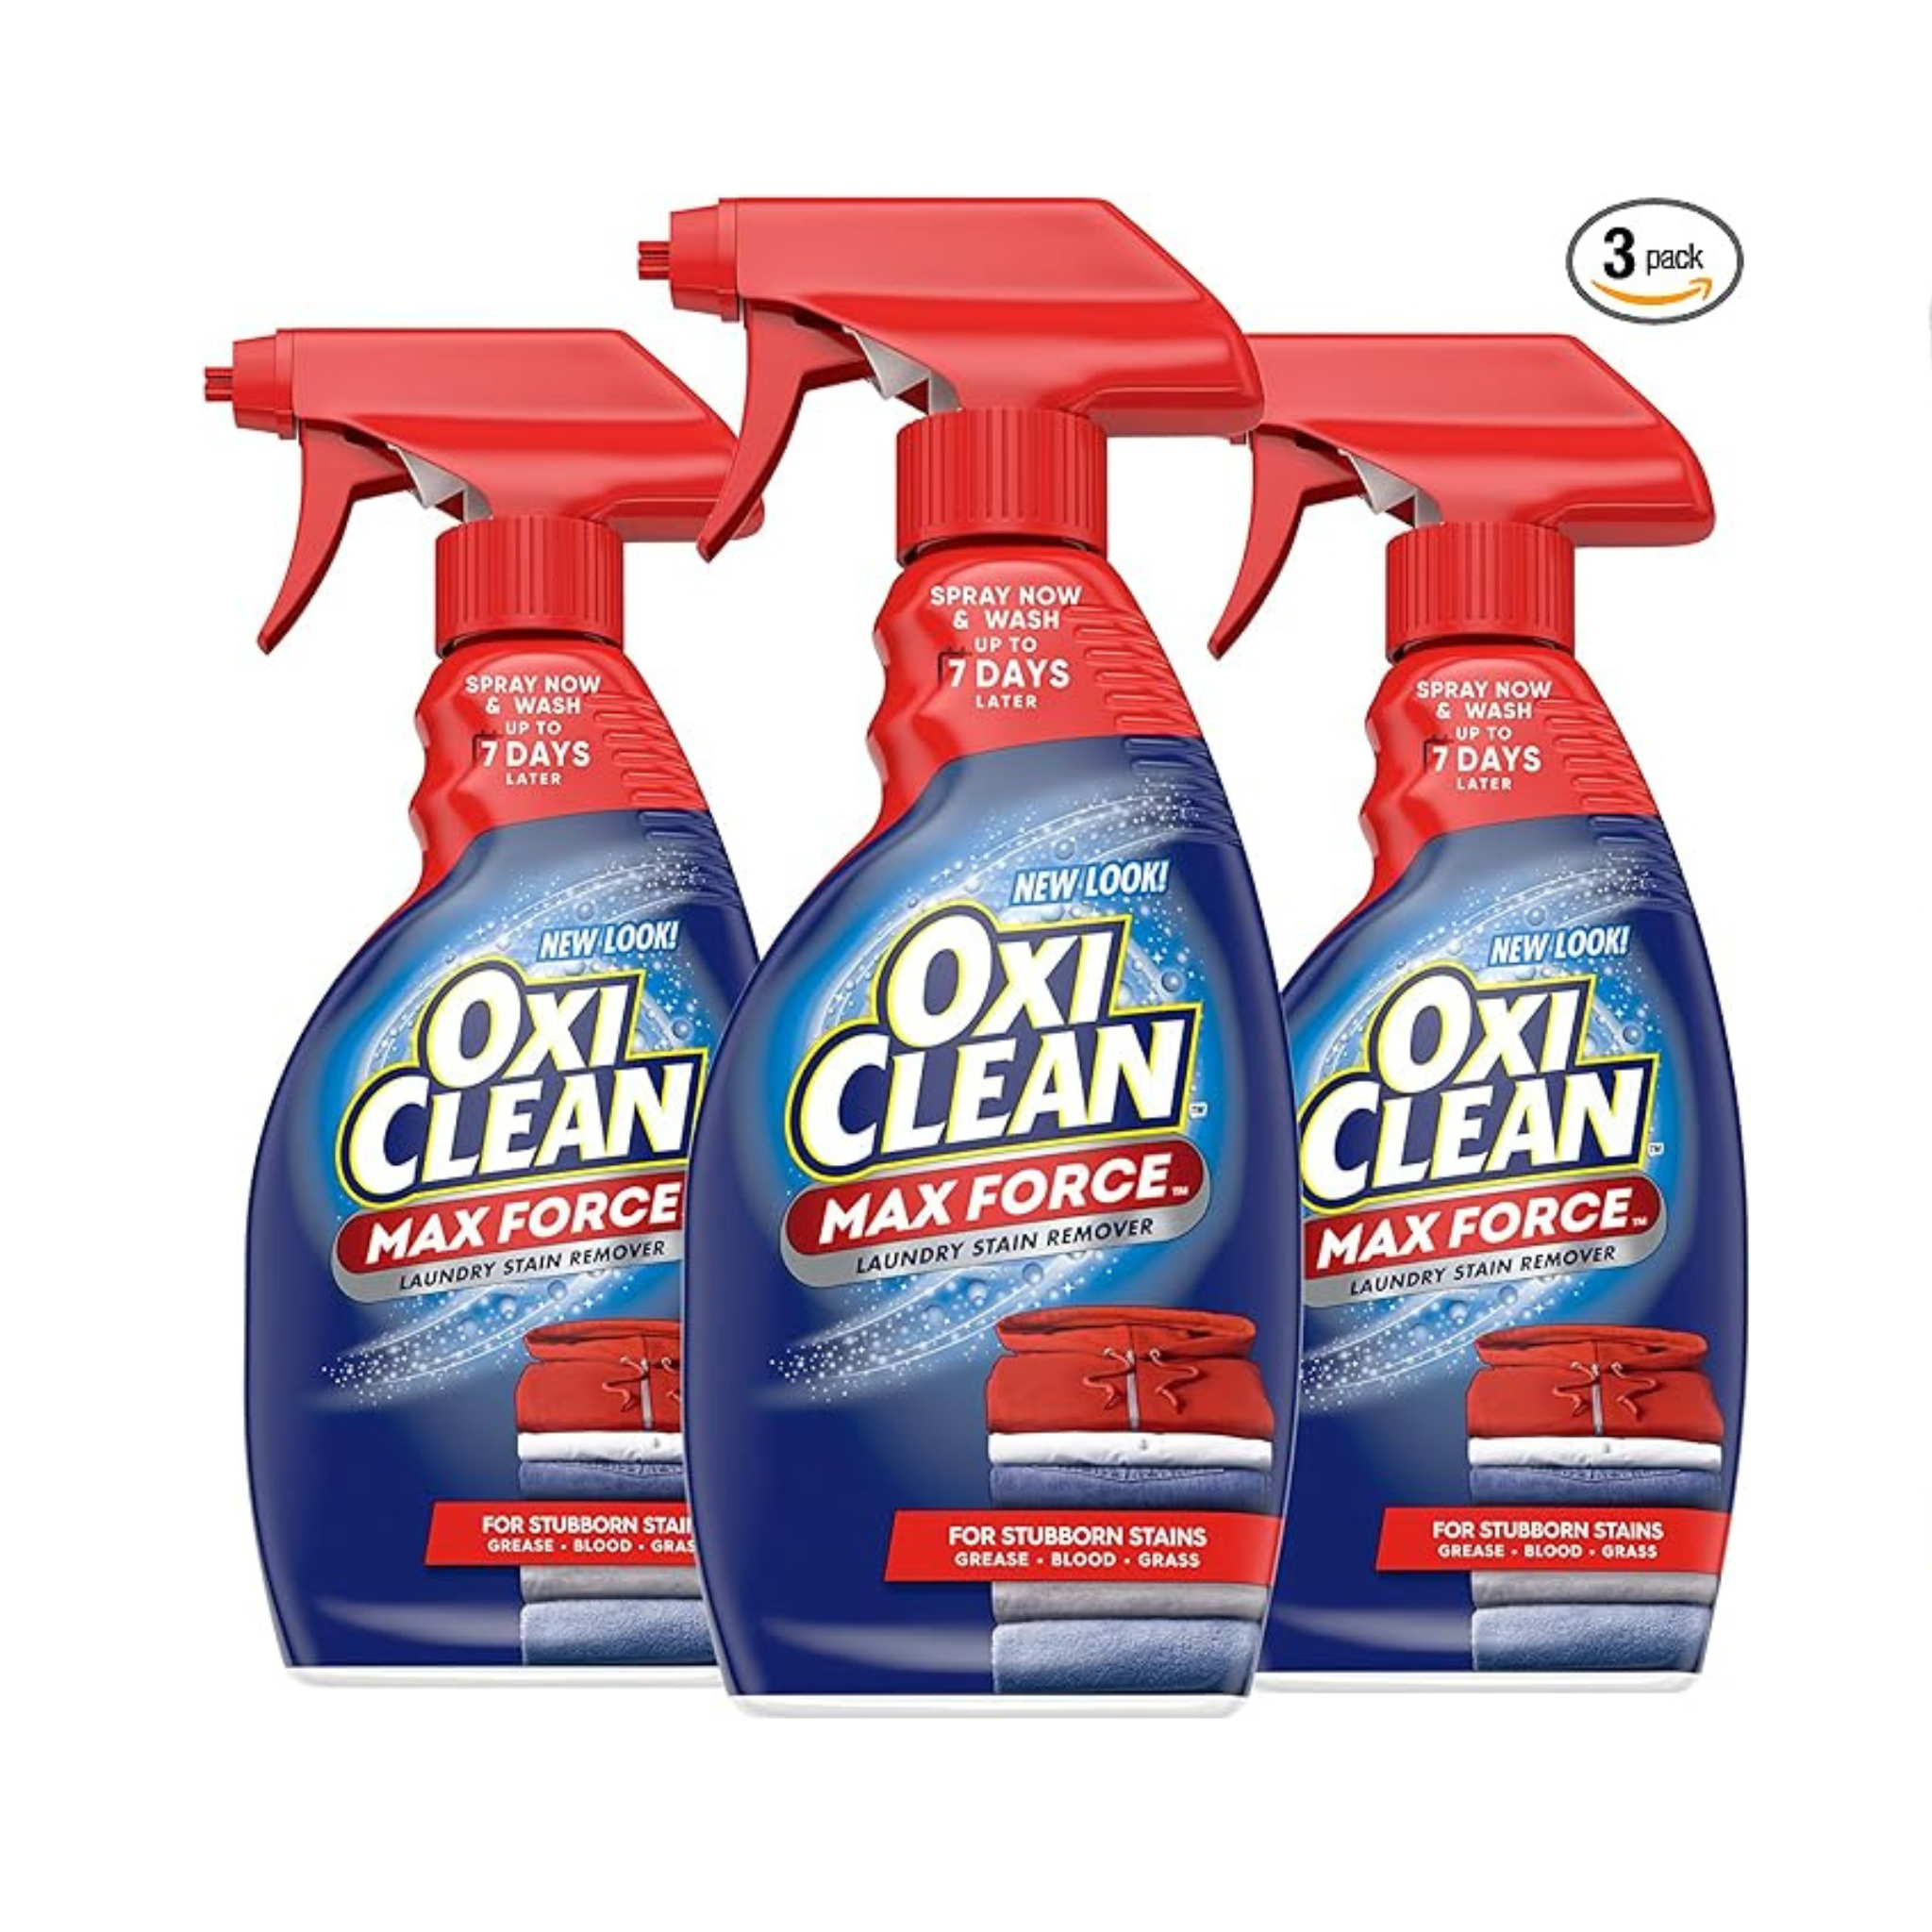 Pack of 3 Oxi Clean Max Force Laundry Stain Remover Spray